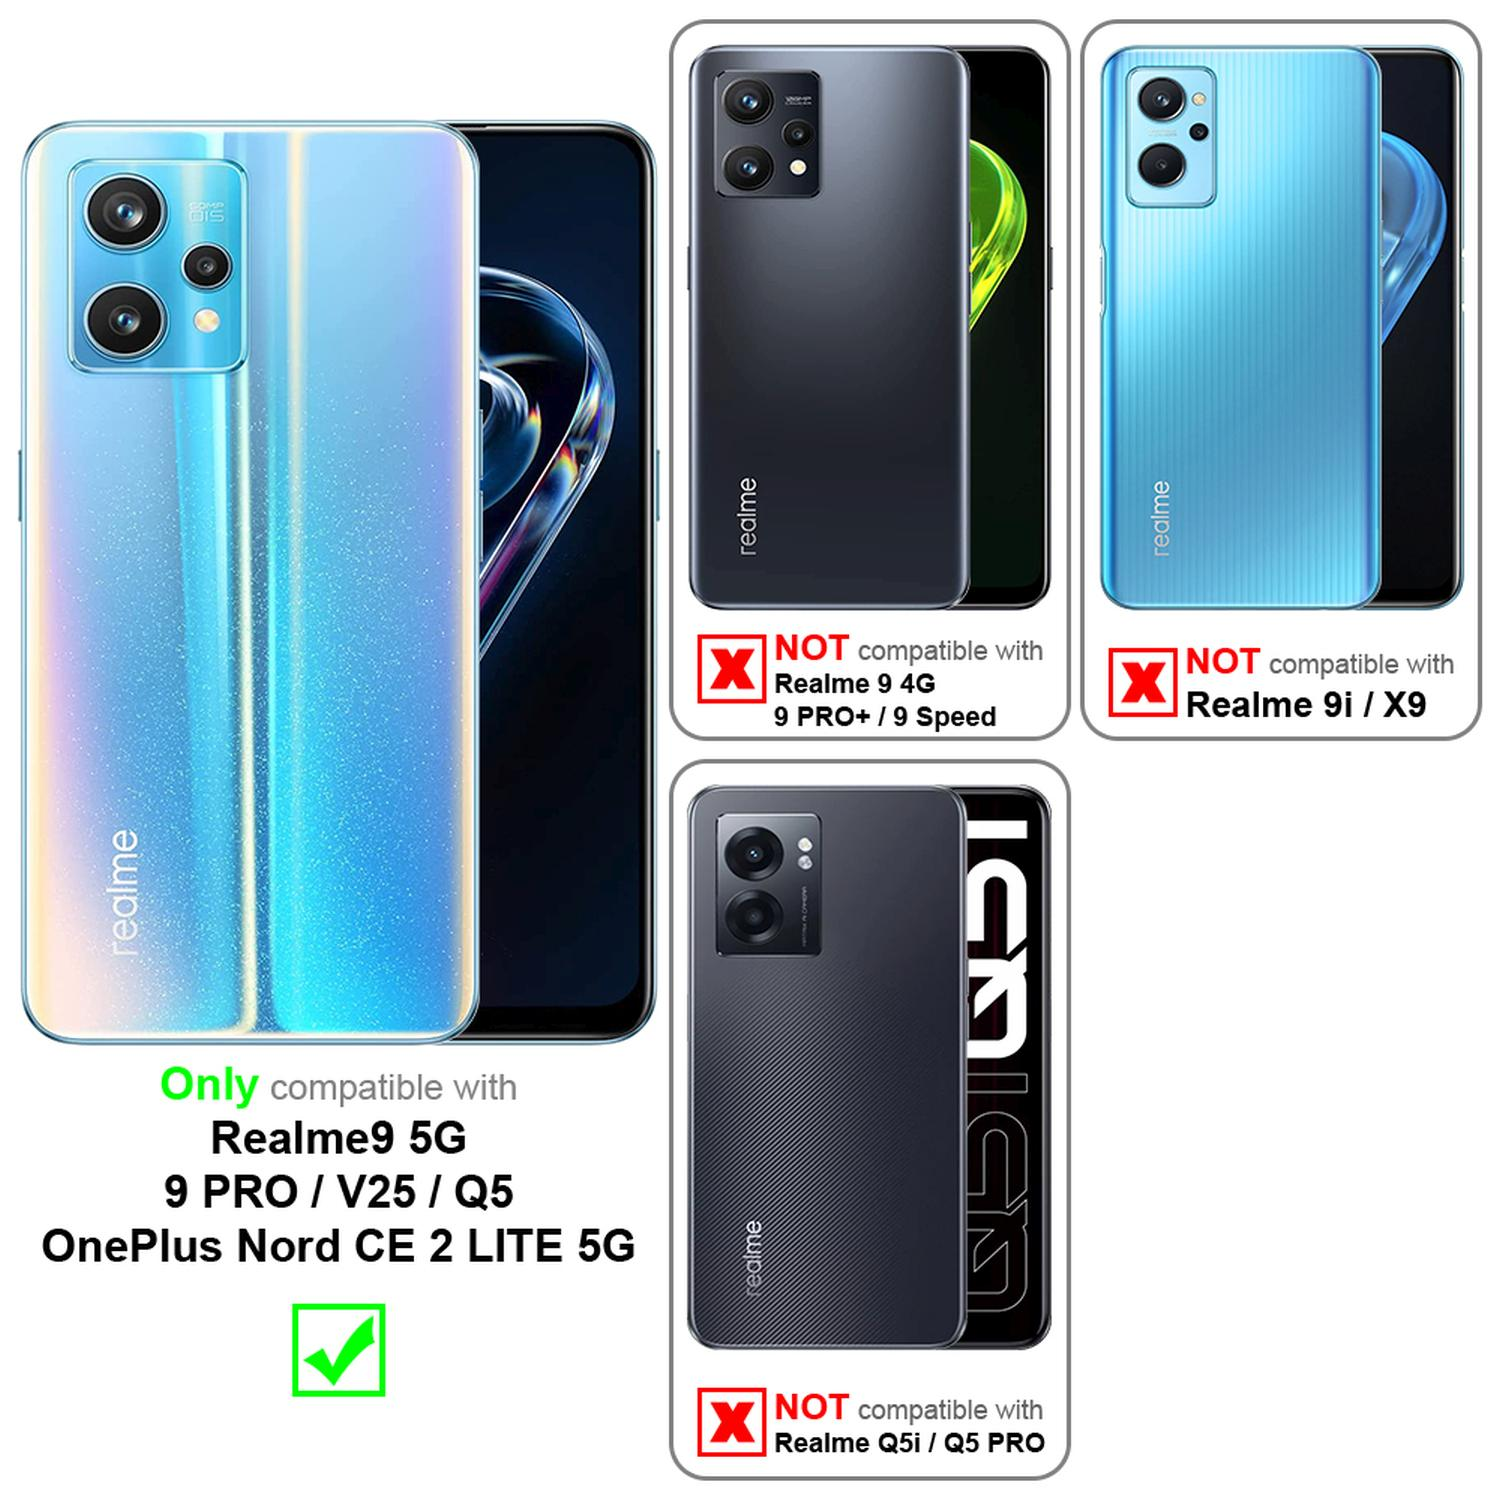 / Book Q5 9 / 2 Standfunktion, Bookcover, 5G, Hülle V25 / CADORABO 5G 9 OnePlus BLAU PRO Nord Realme, PASTELL LITE CE /